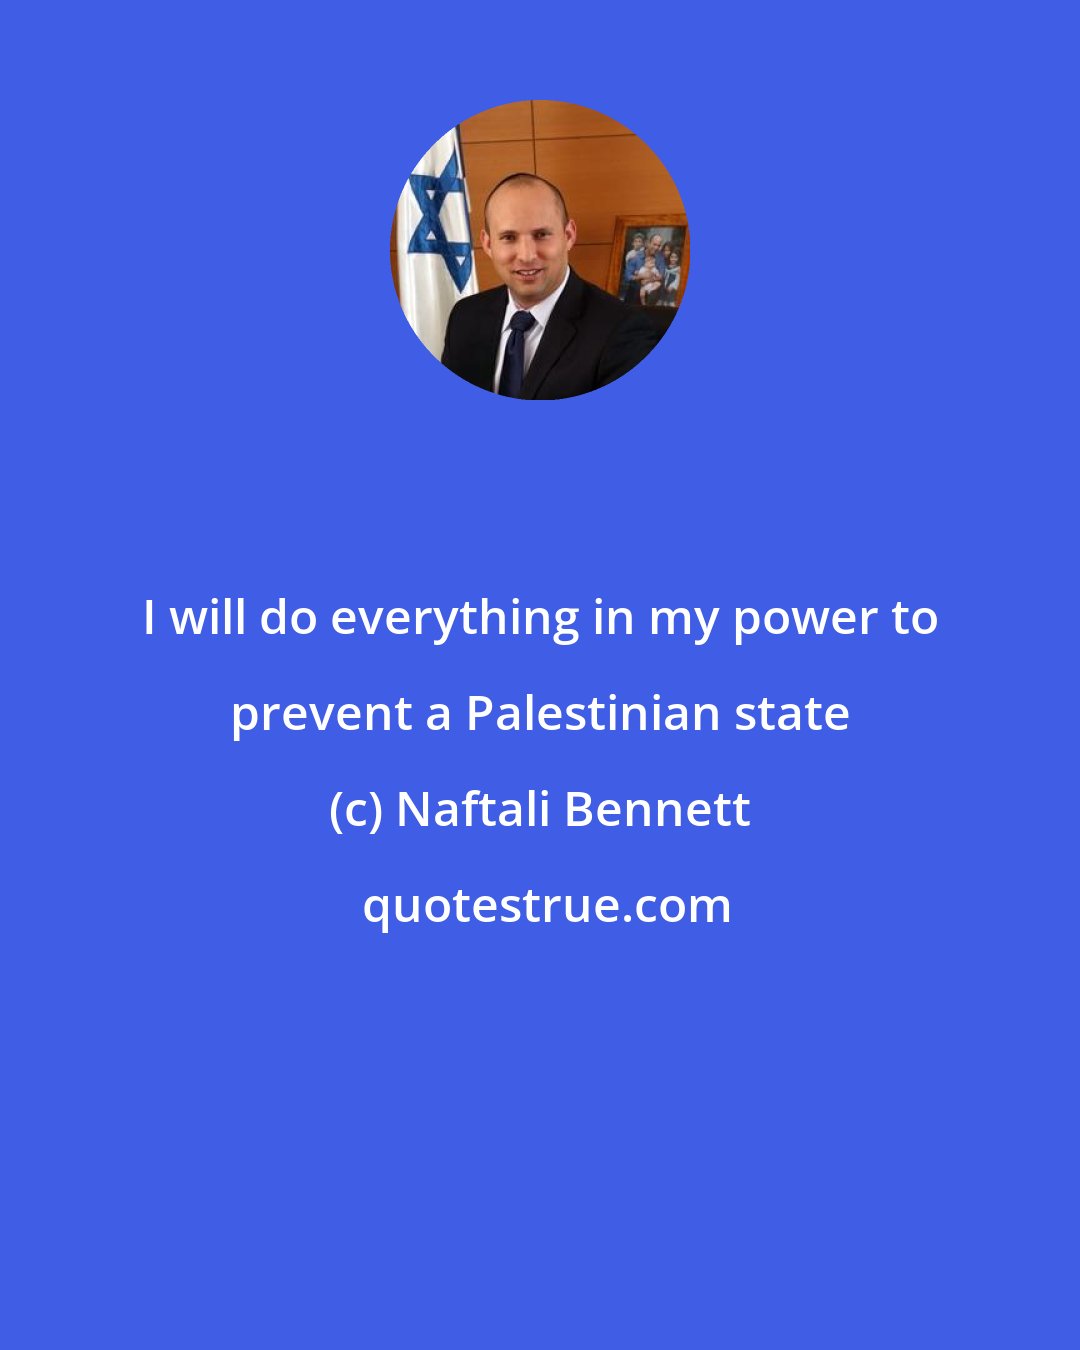 Naftali Bennett: I will do everything in my power to prevent a Palestinian state